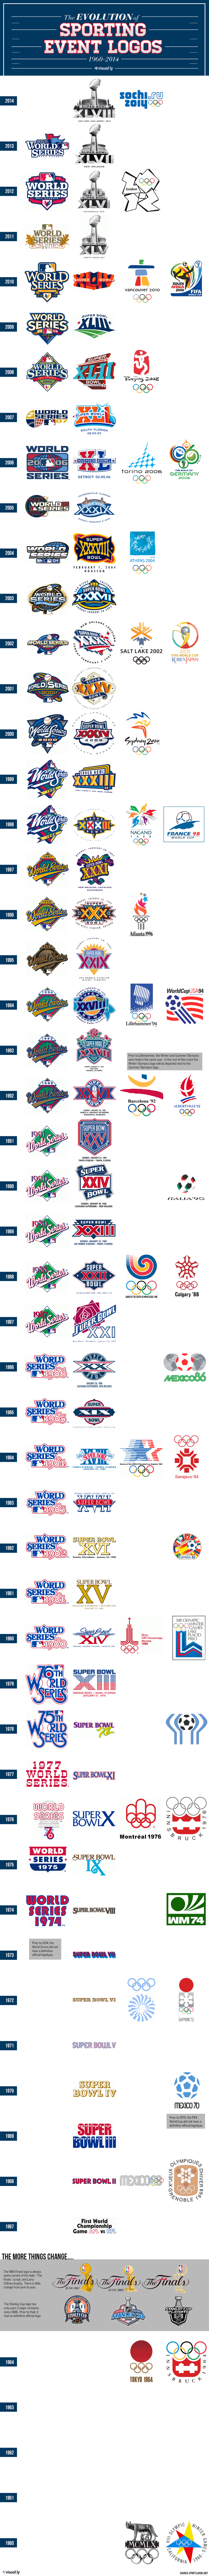 The Evolution of Sporting Event Logos Infographic